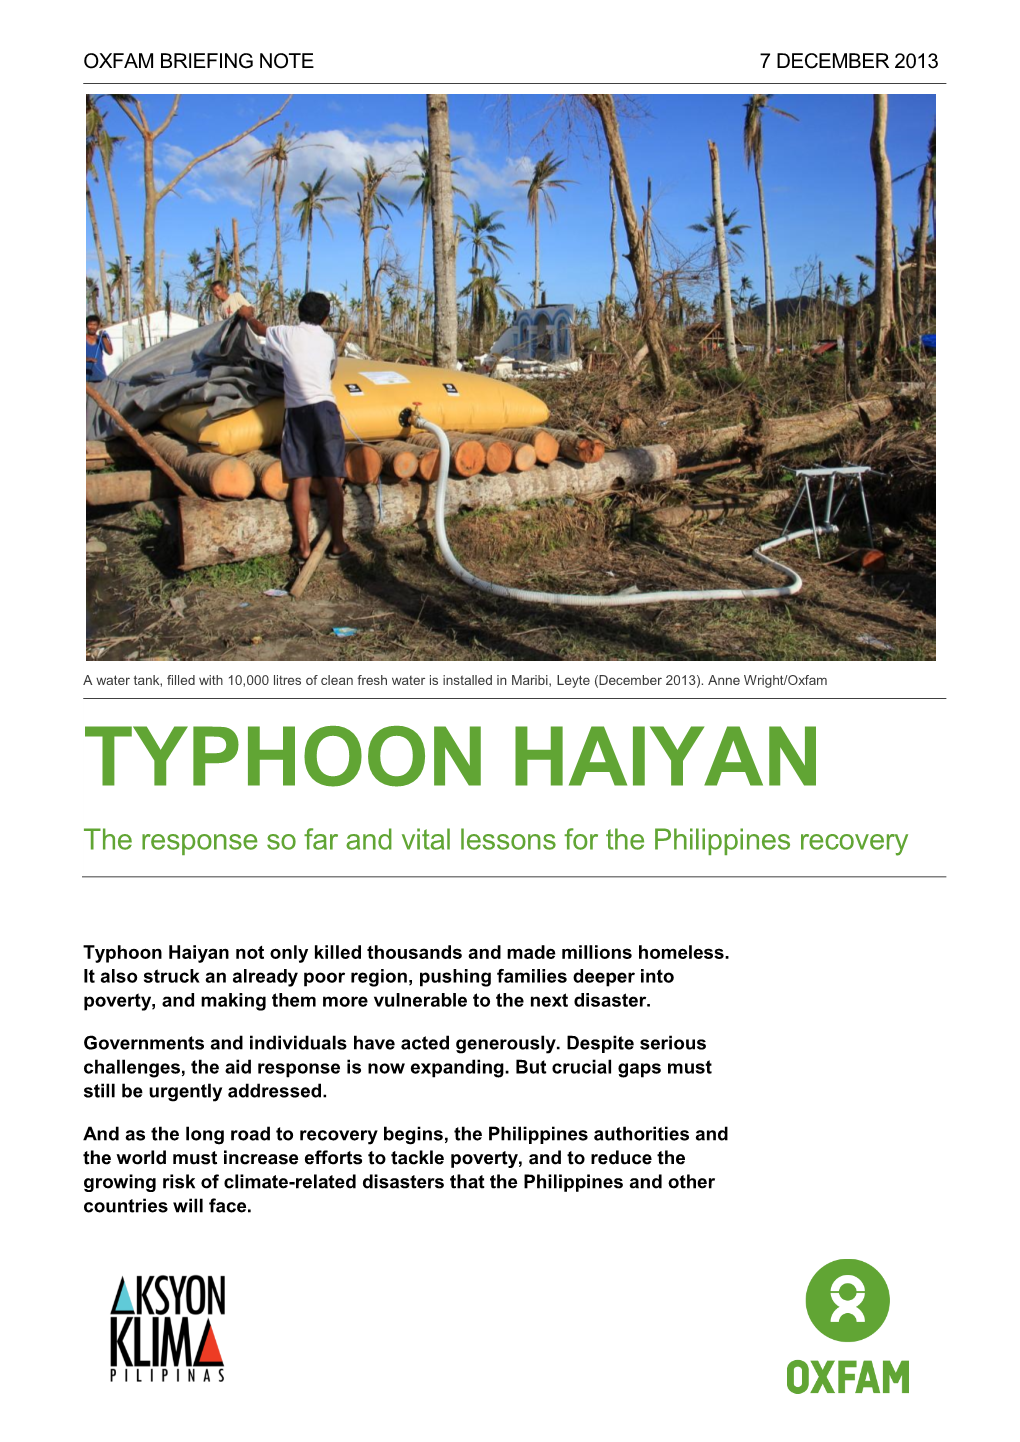 Typhoon Haiyan: the Response So Far and Vital Lessons for the Philippines Recovery